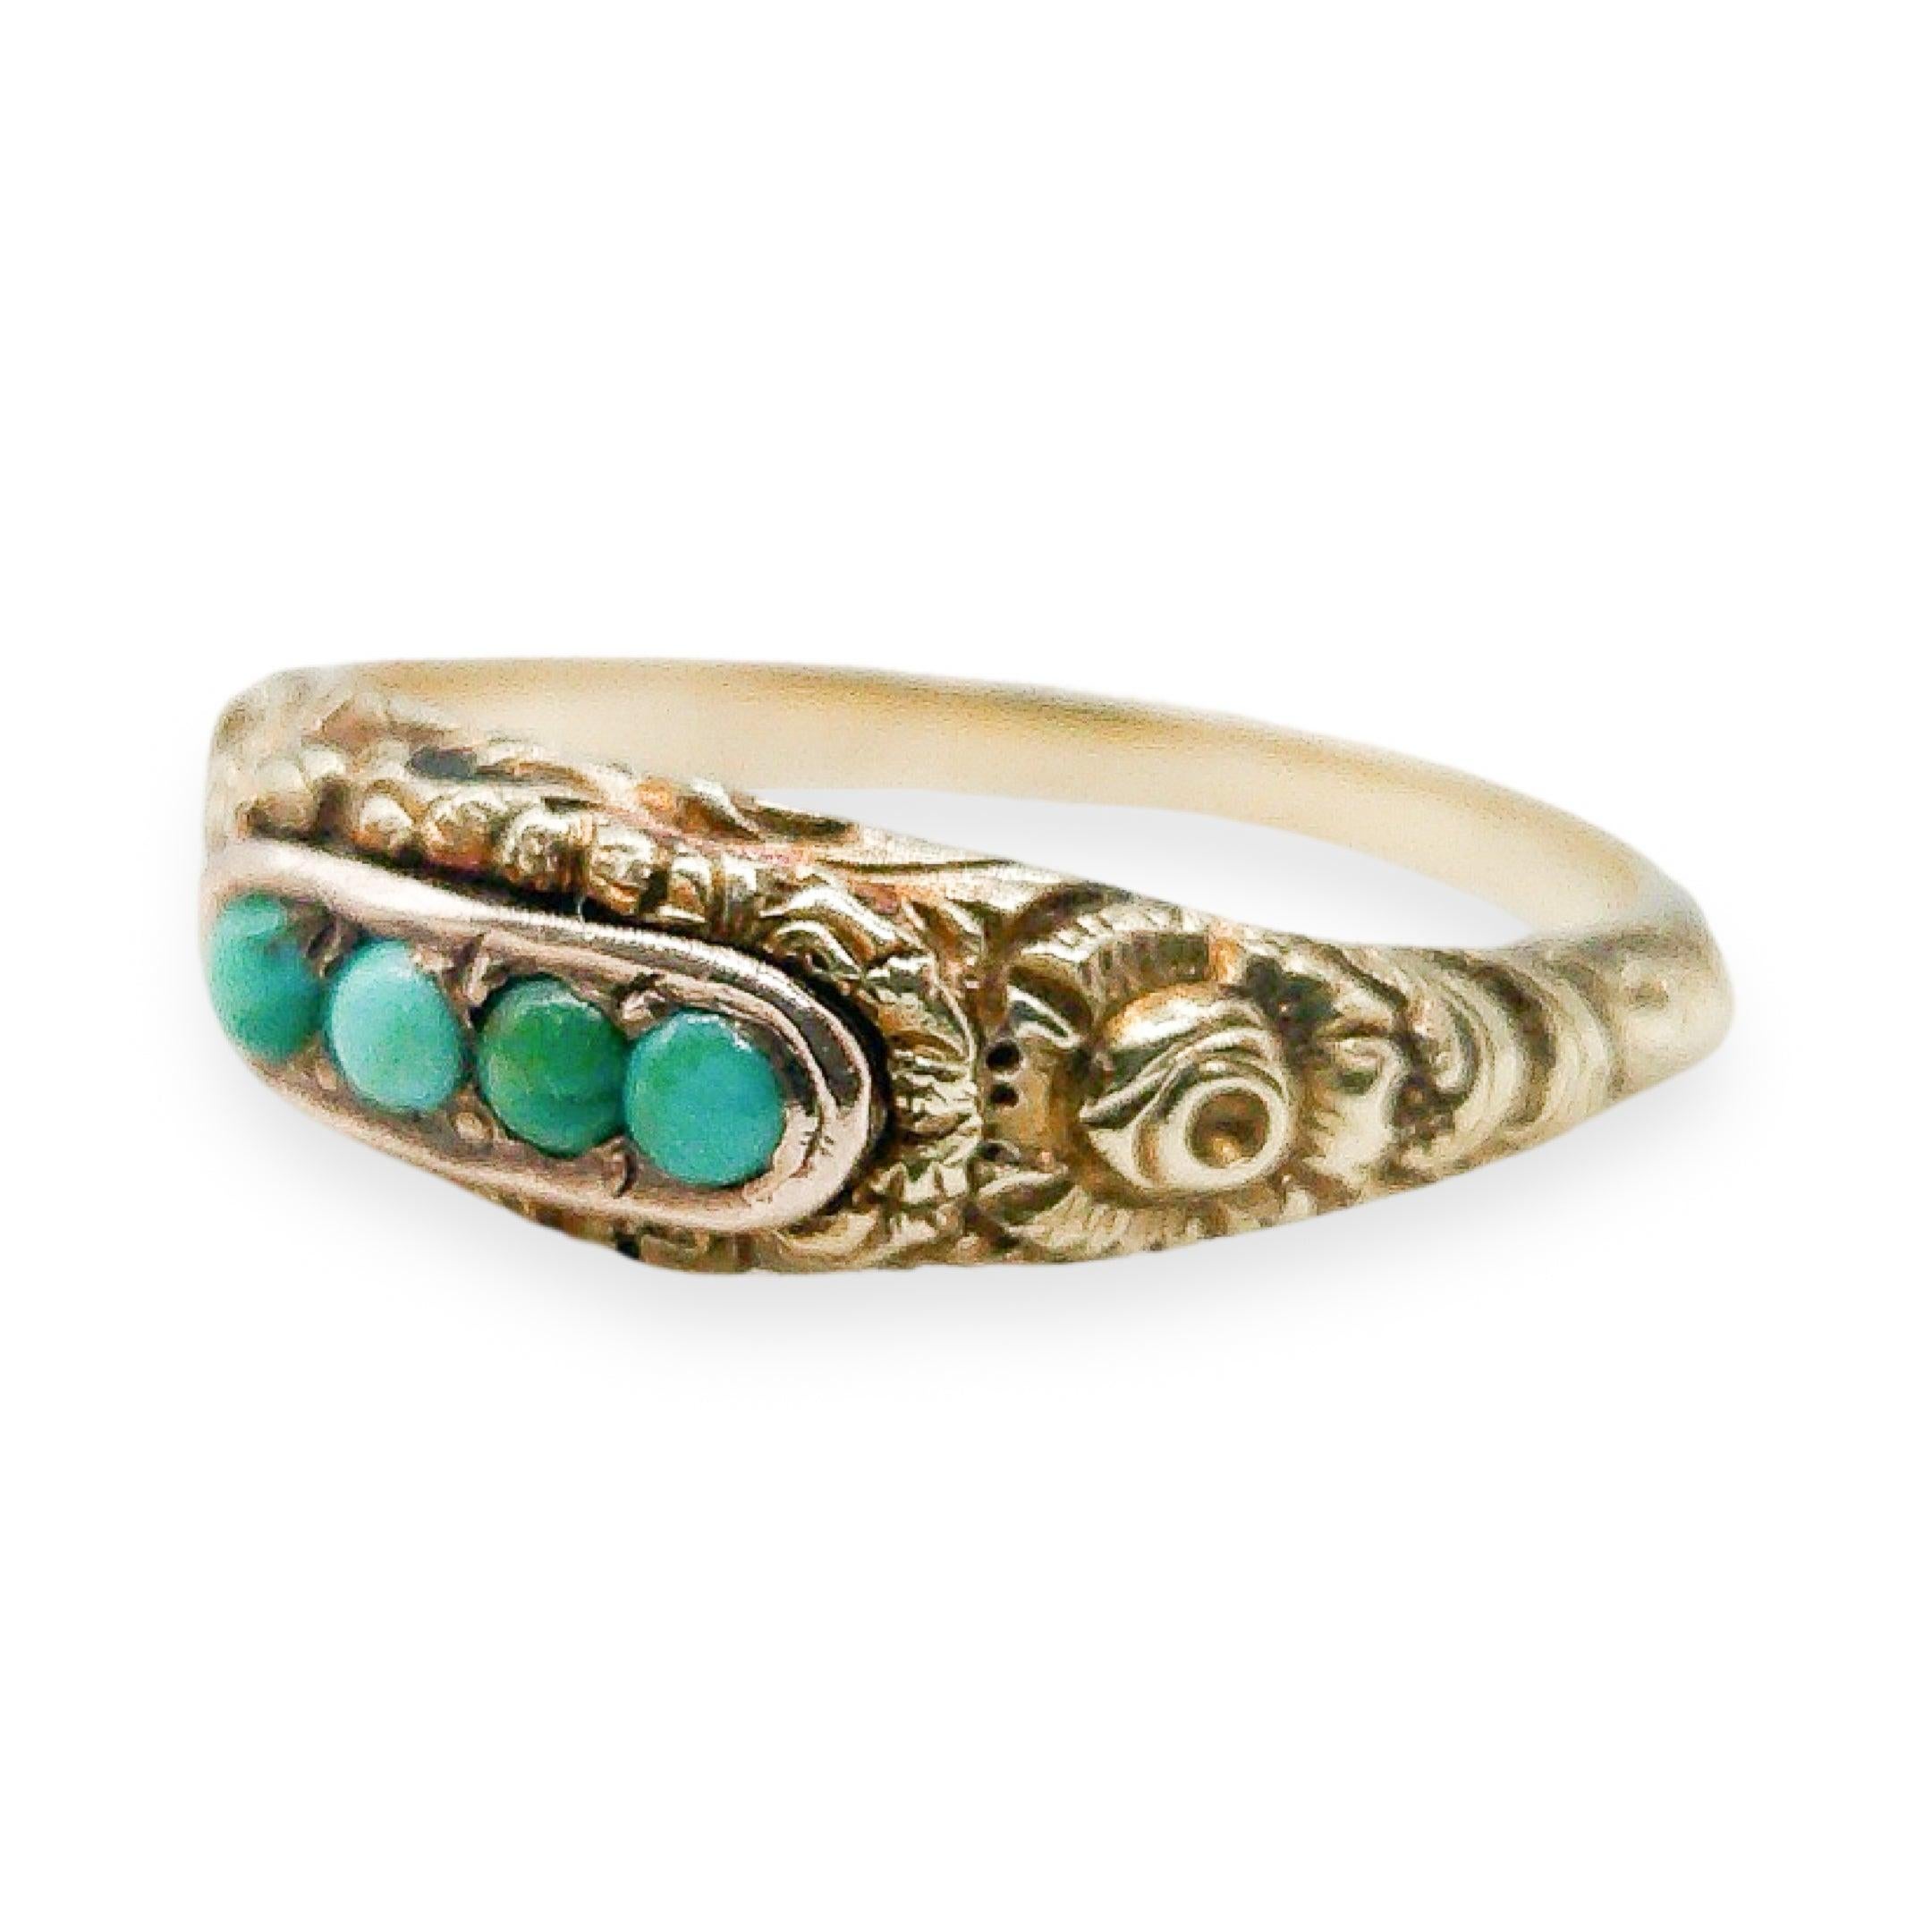 This gorgeous Georgian Turquoise ring was meticulously handcrafted in 1833. Set in 10k gold this exquisite piece features a half-band adorned with intricate floral scrolls that create a captivating design. At the center of the ring, you'll find four